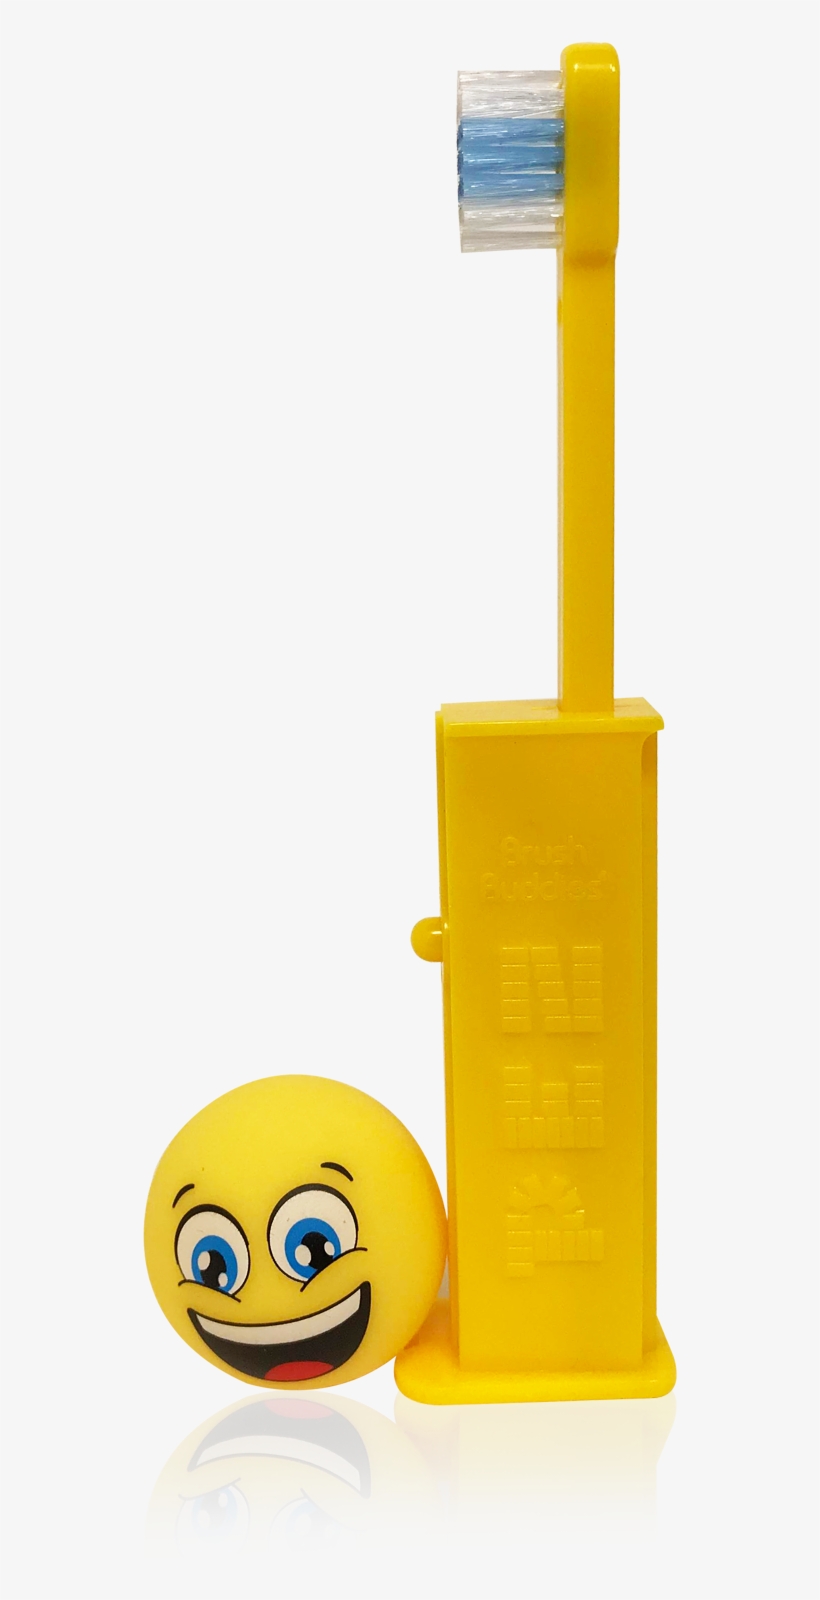 Load Image Into Gallery Viewer, Brush Buddies Pez Poppin& - Smiley, transparent png #4220345